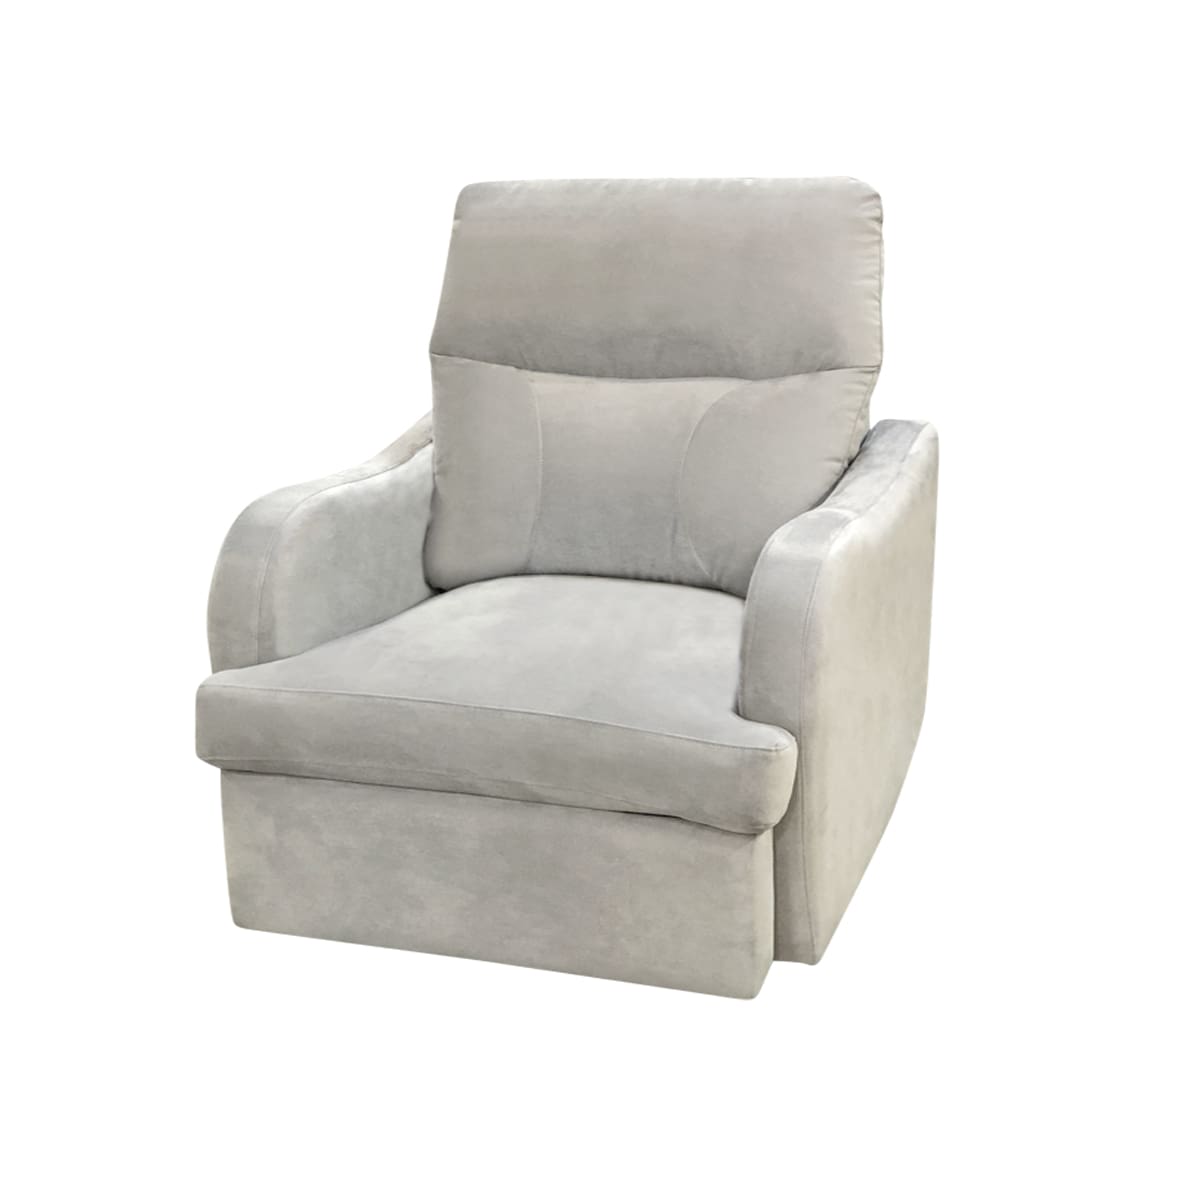 Cathy Chair - accent chairs